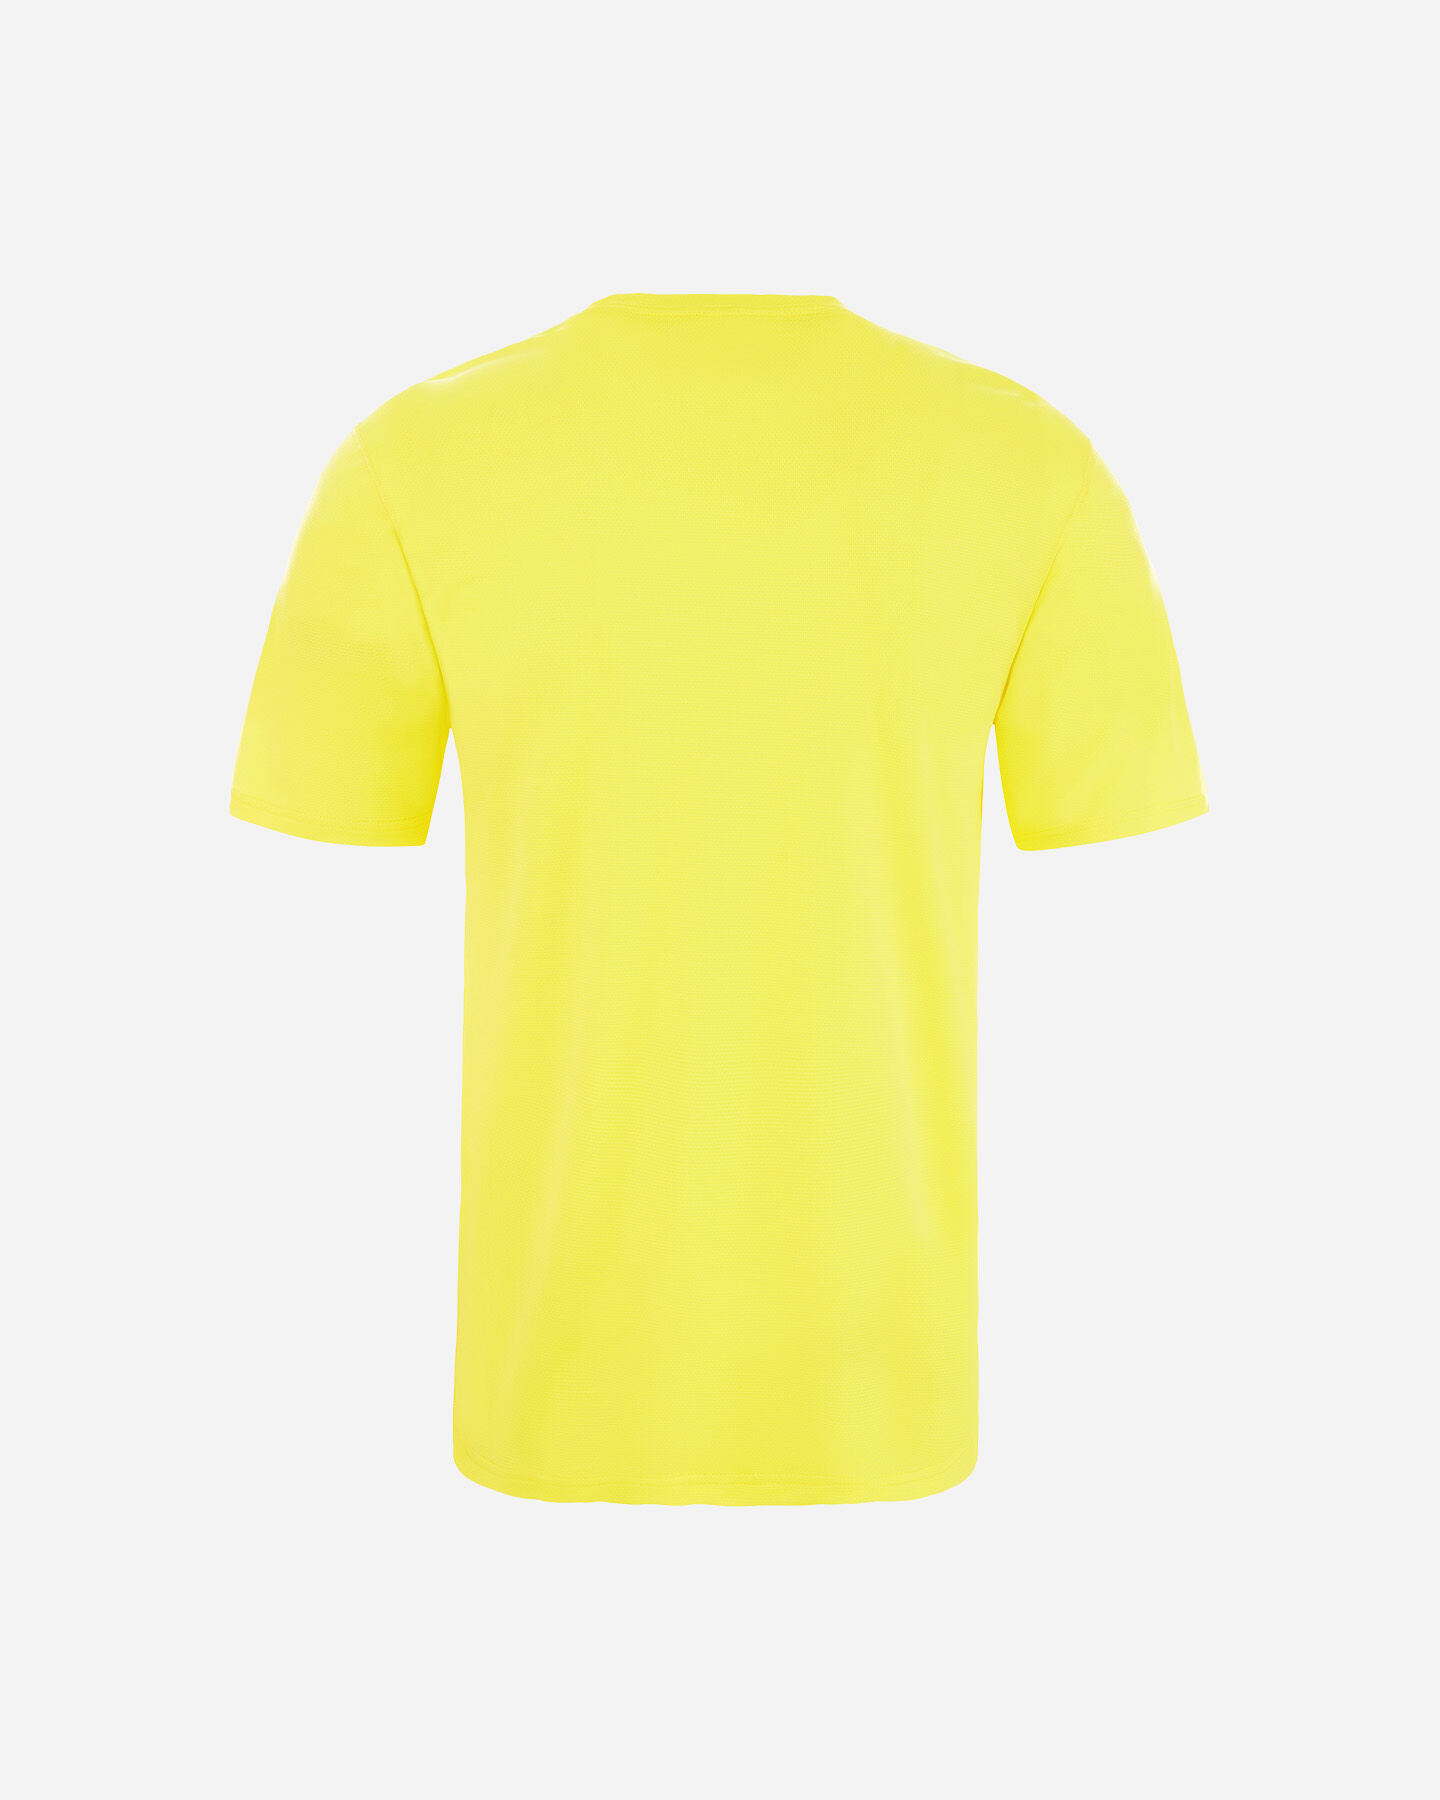  T-Shirt THE NORTH FACE FLEX II M S5202290|DW9|XS scatto 1